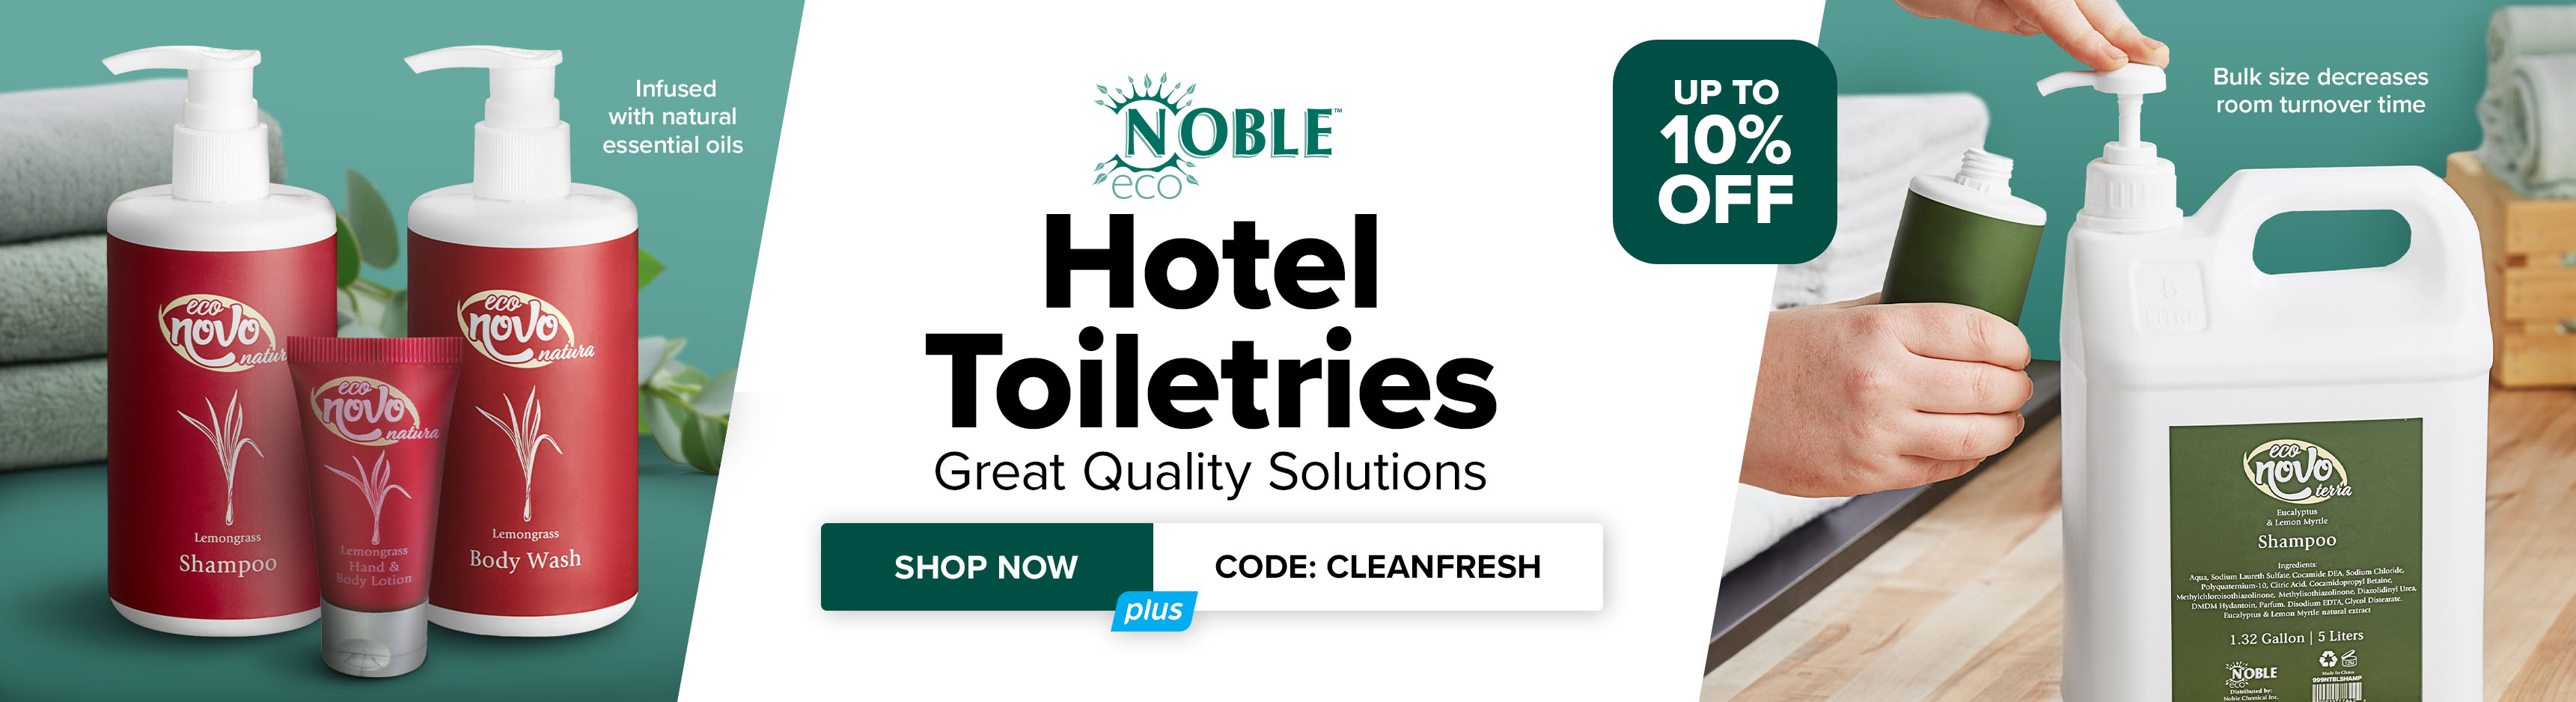 Save up to 10% on Noble Eco hotel toiletries